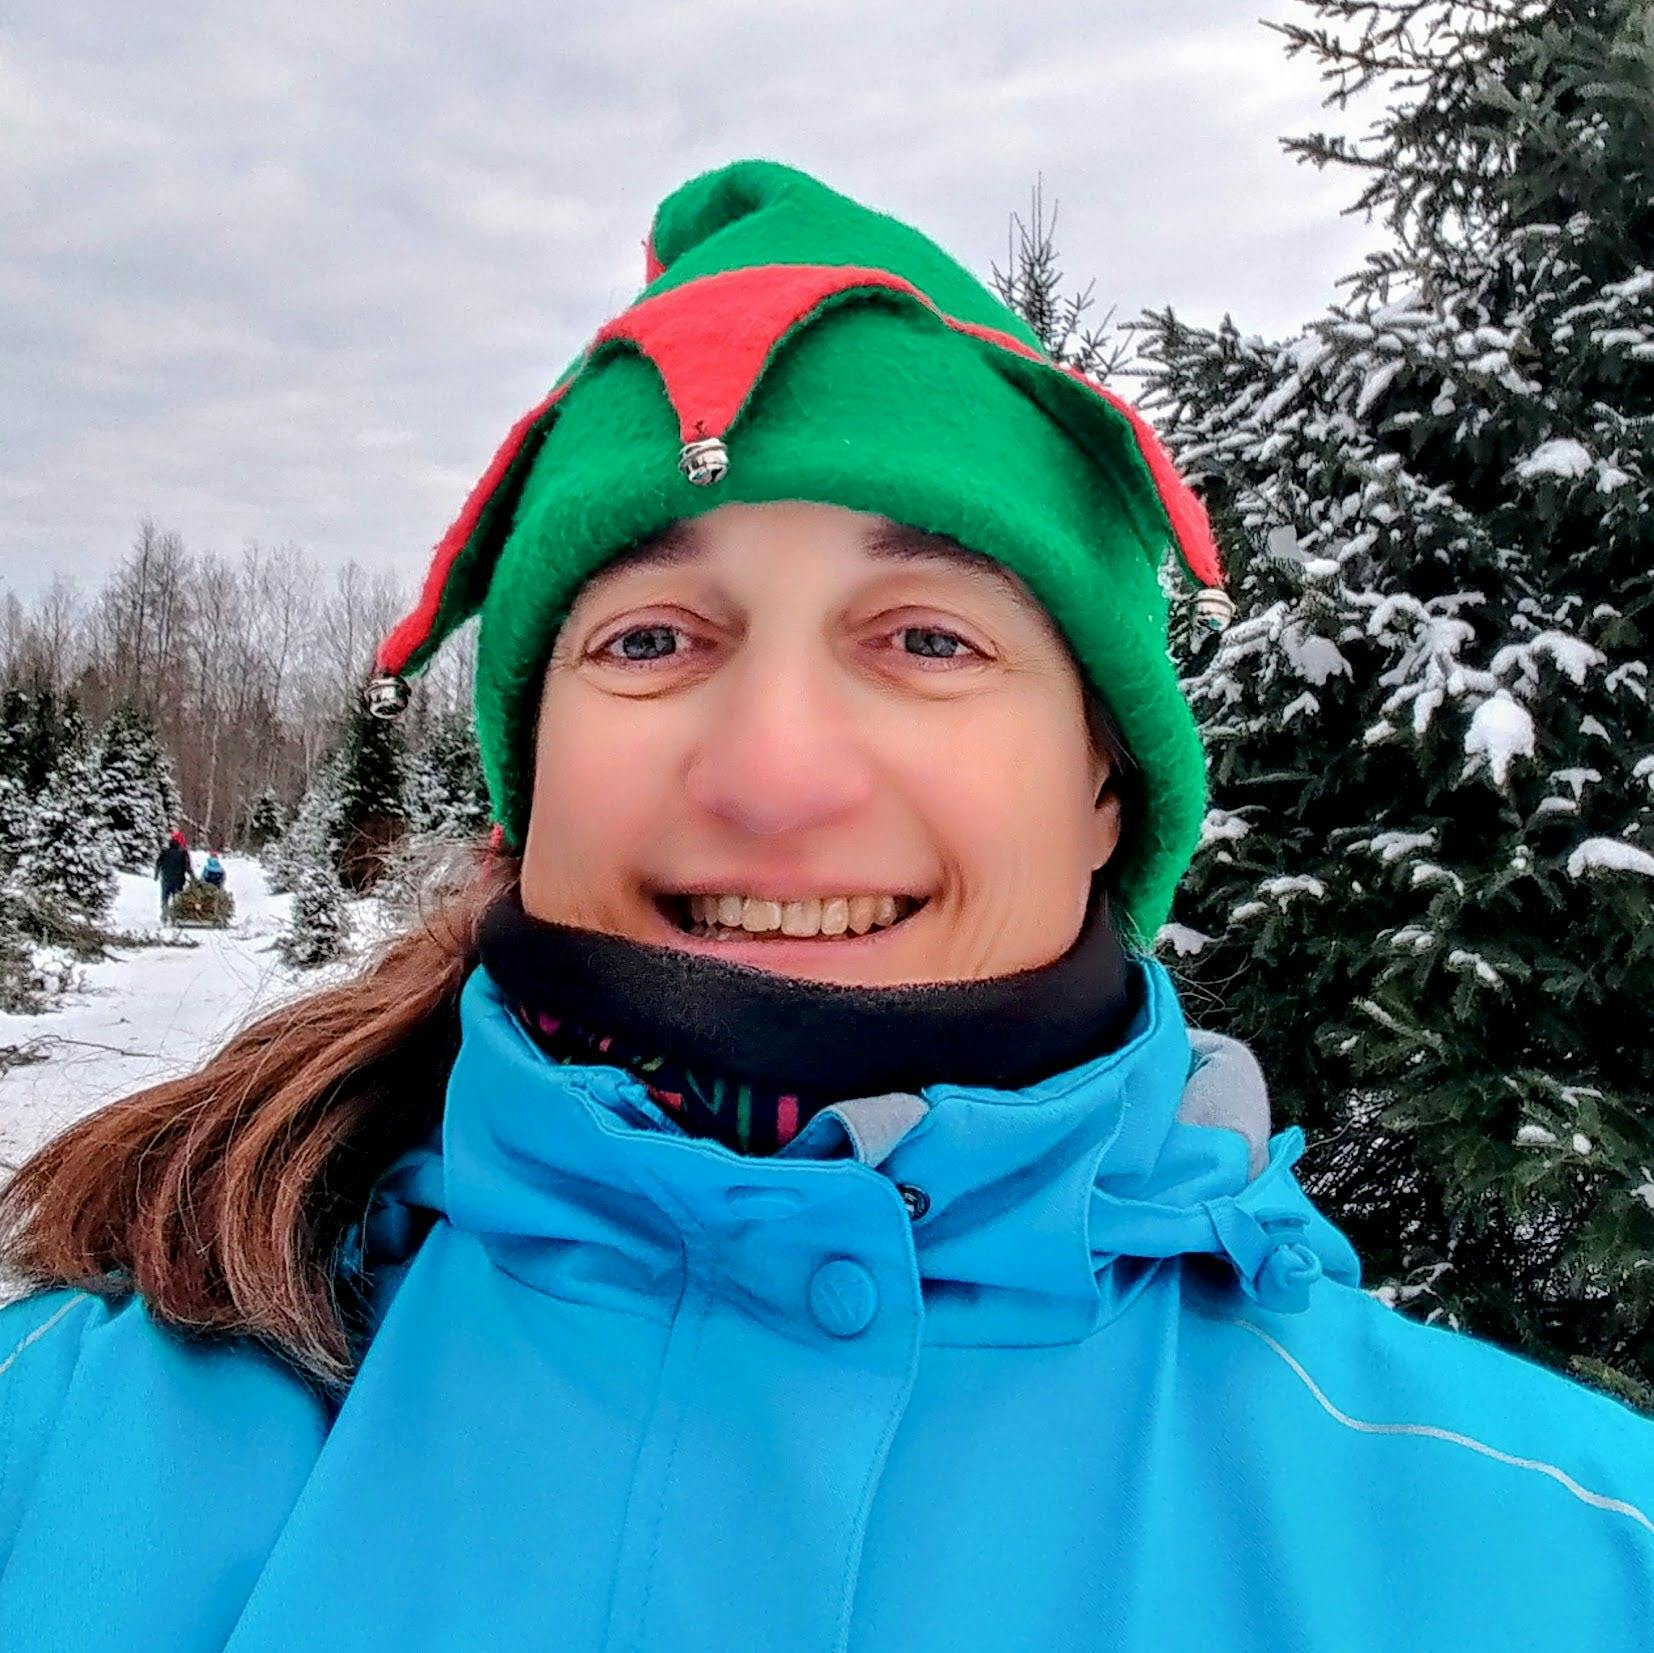 Stephie's profile picture, she's wearing a blue winter coat and a elf hat, smiling at the camera.